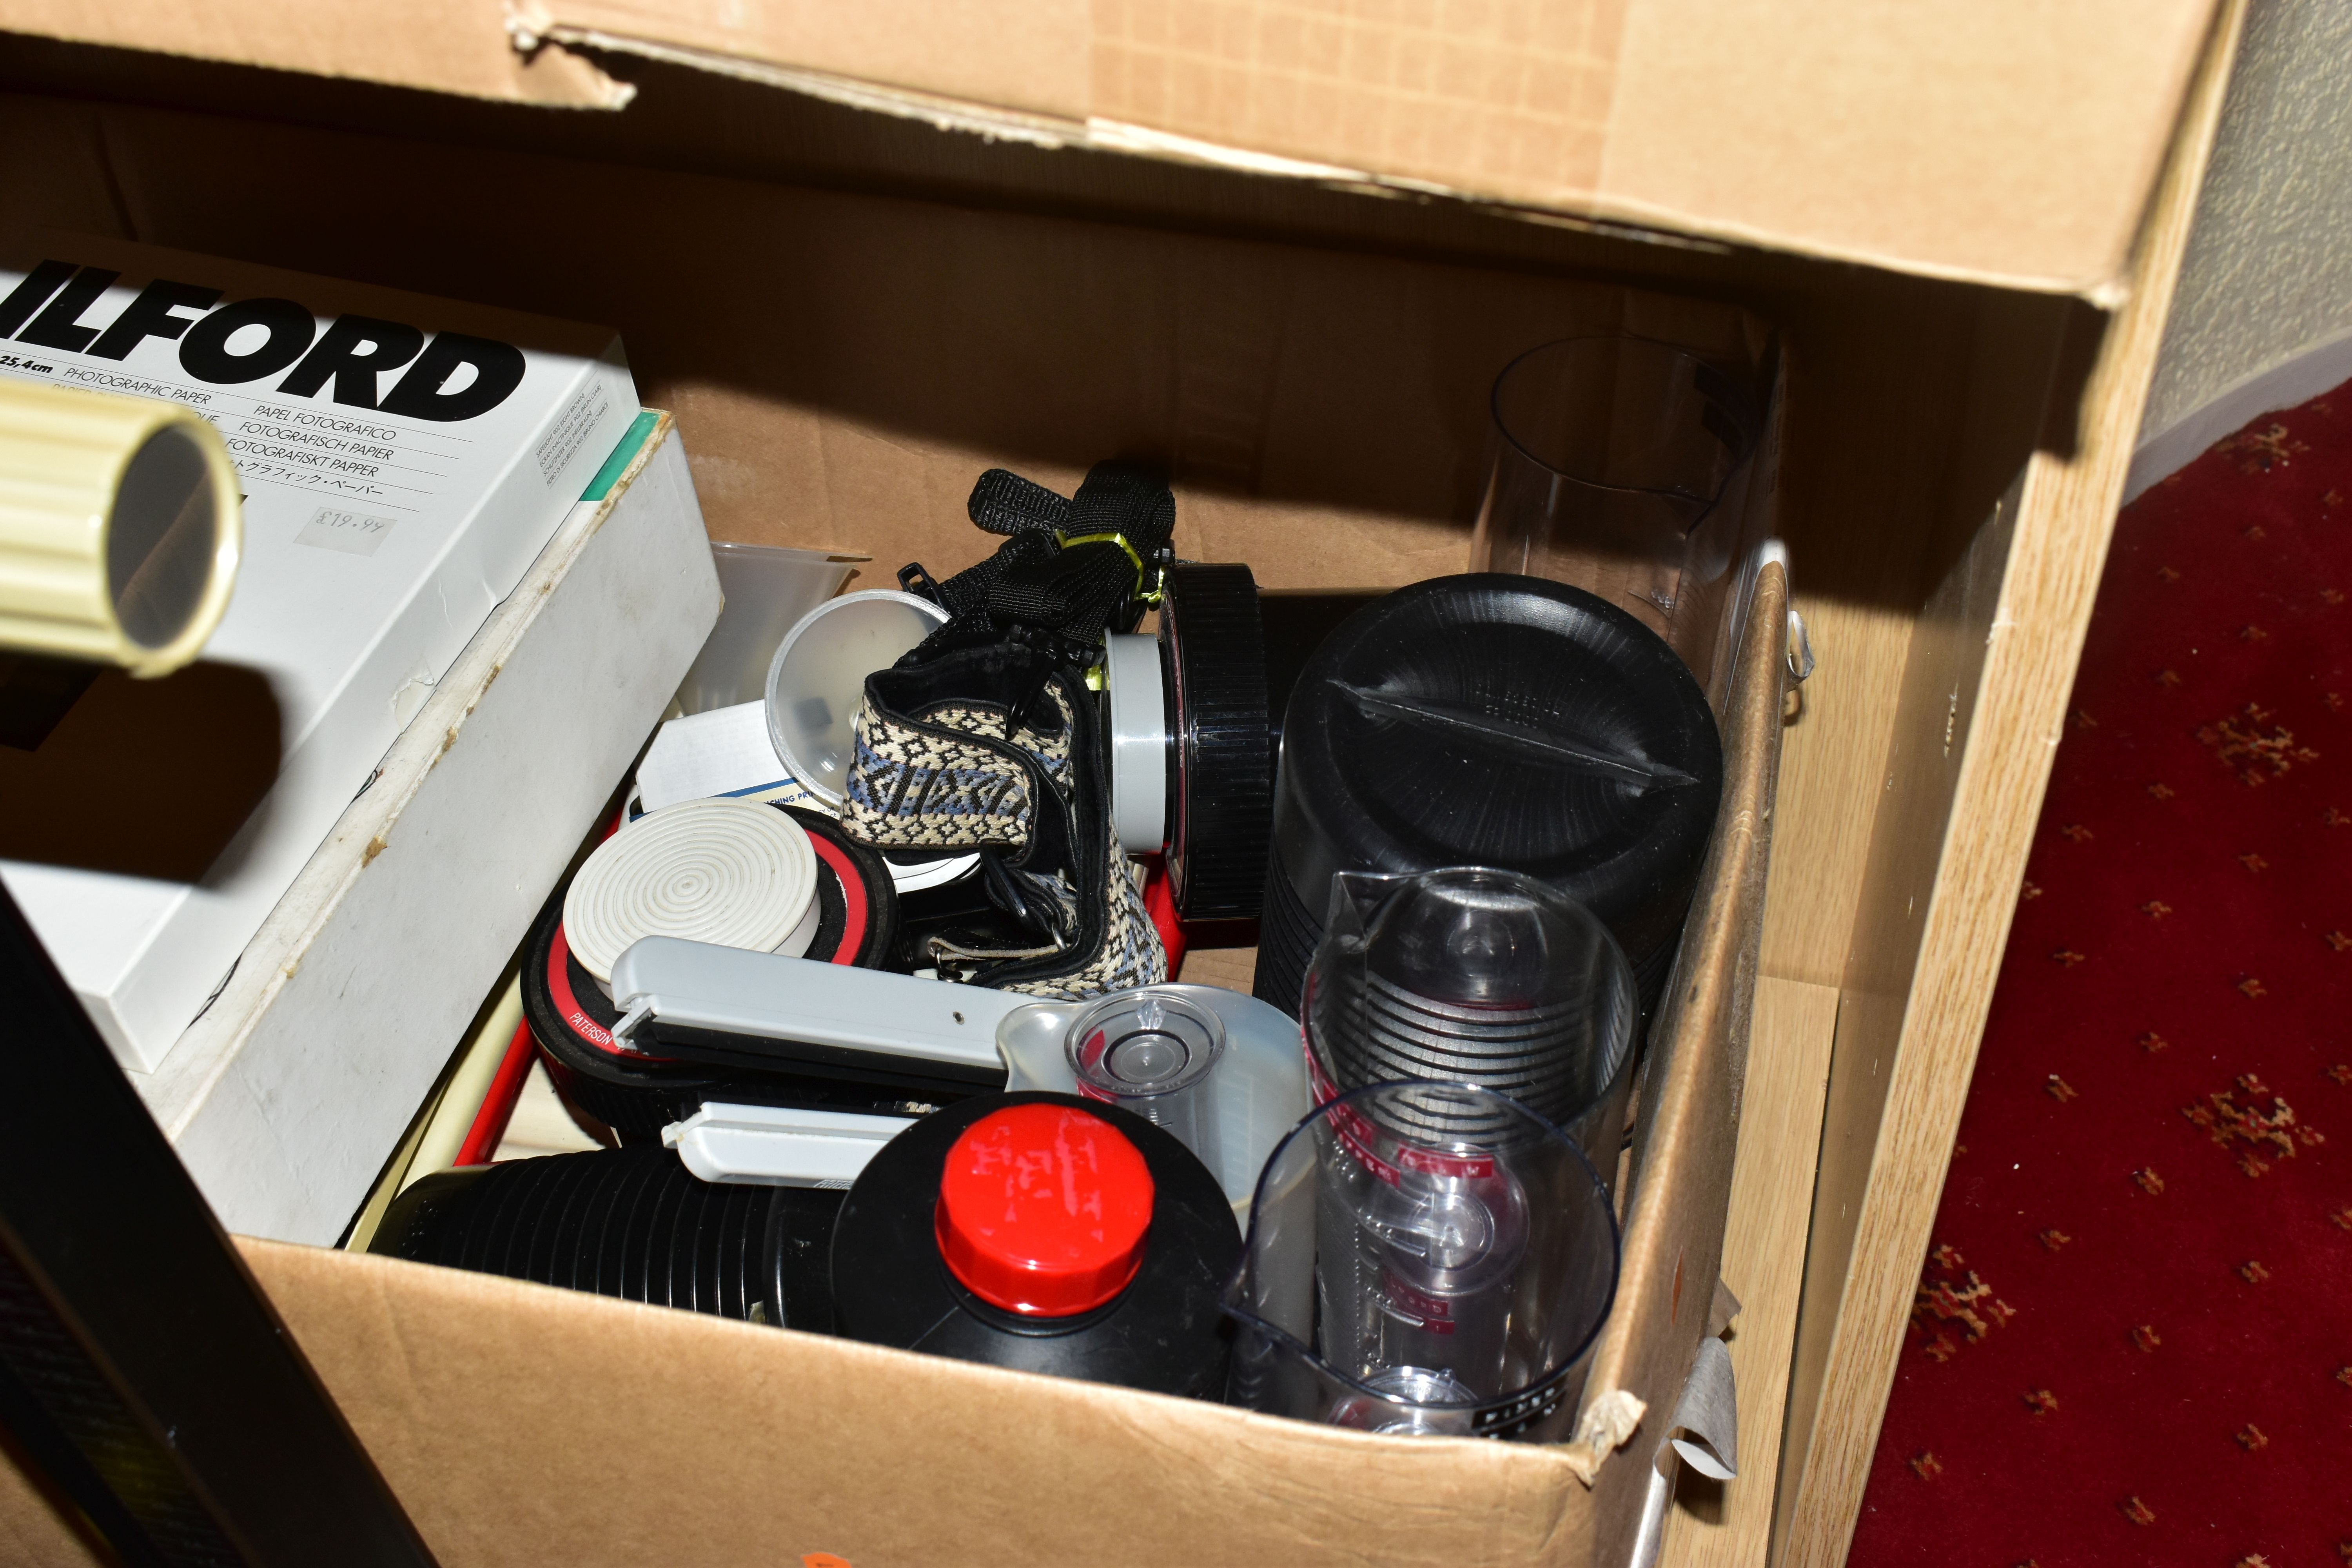 A QUANTITY OF PHOTOGRAPHIC DEVELOPING EQUIPMENT including a LPL C5700 Colour enlarger, Tanks, - Image 8 of 9